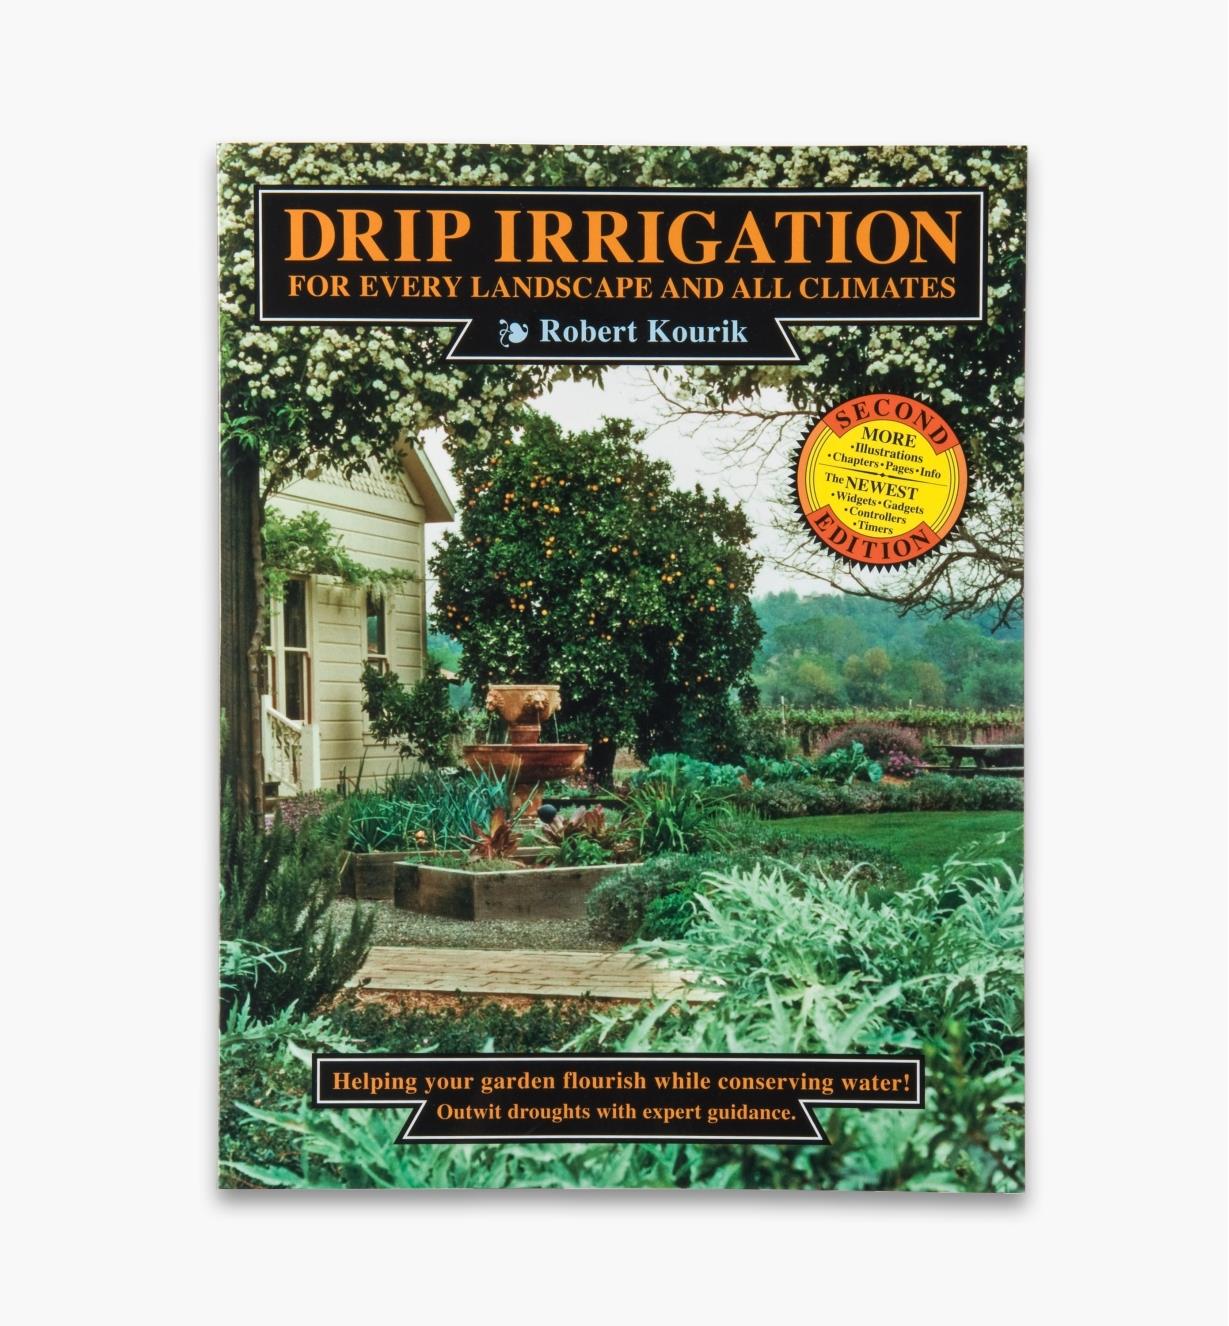 LA570 - Drip Irrigation for Every Landscape and All Climates